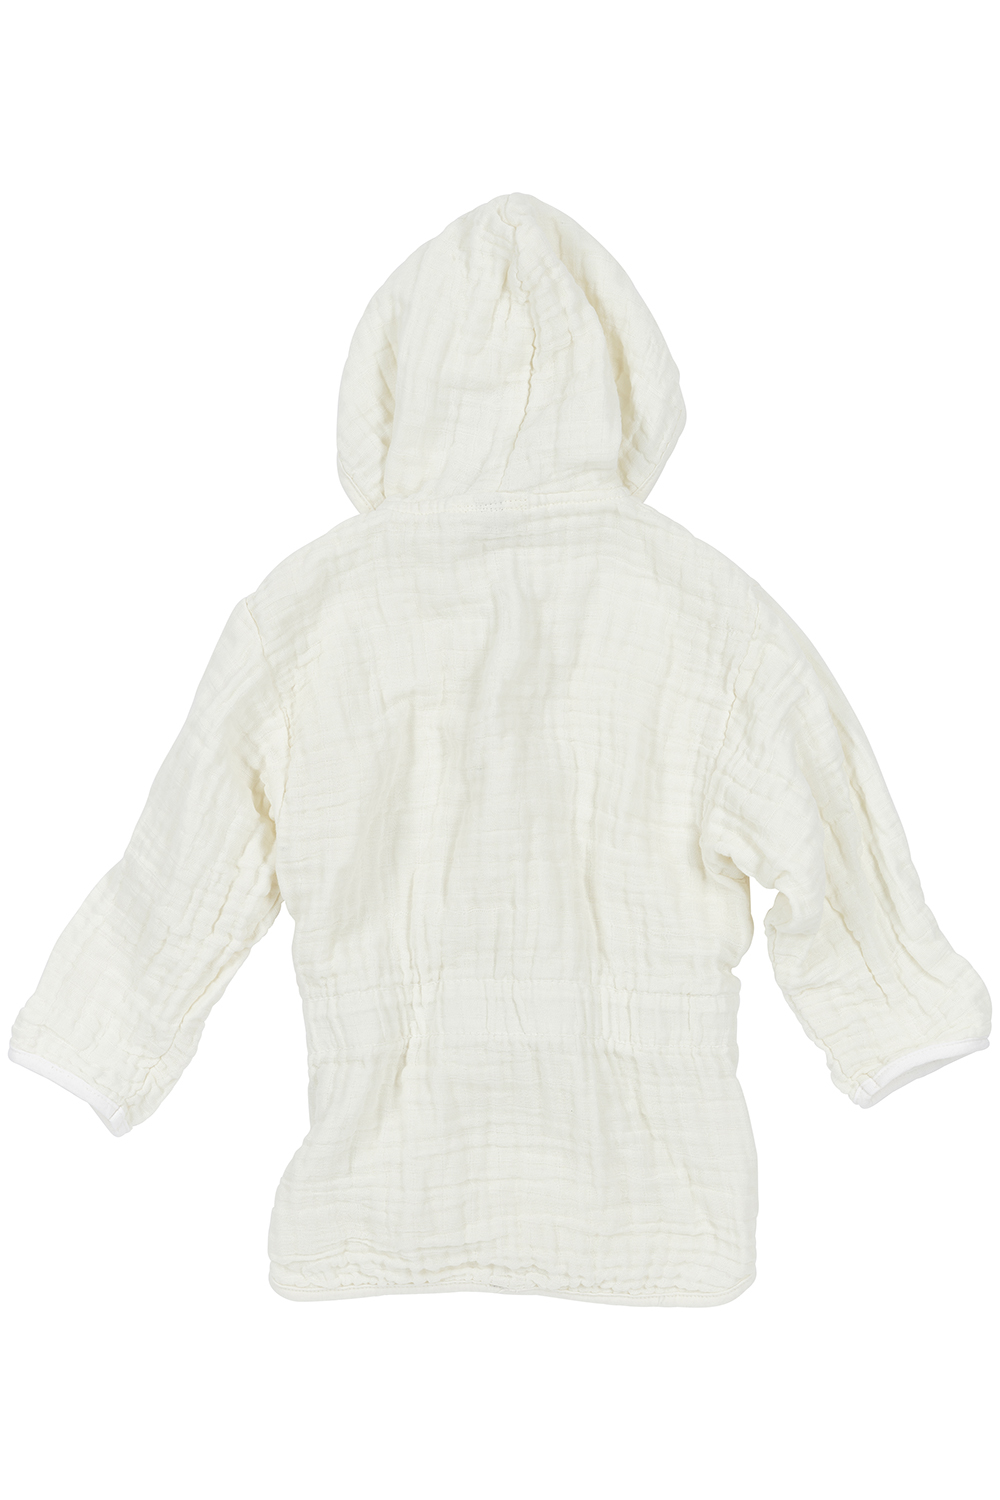 Bademantel pre-washed musselin Uni - offwhite - 98/104